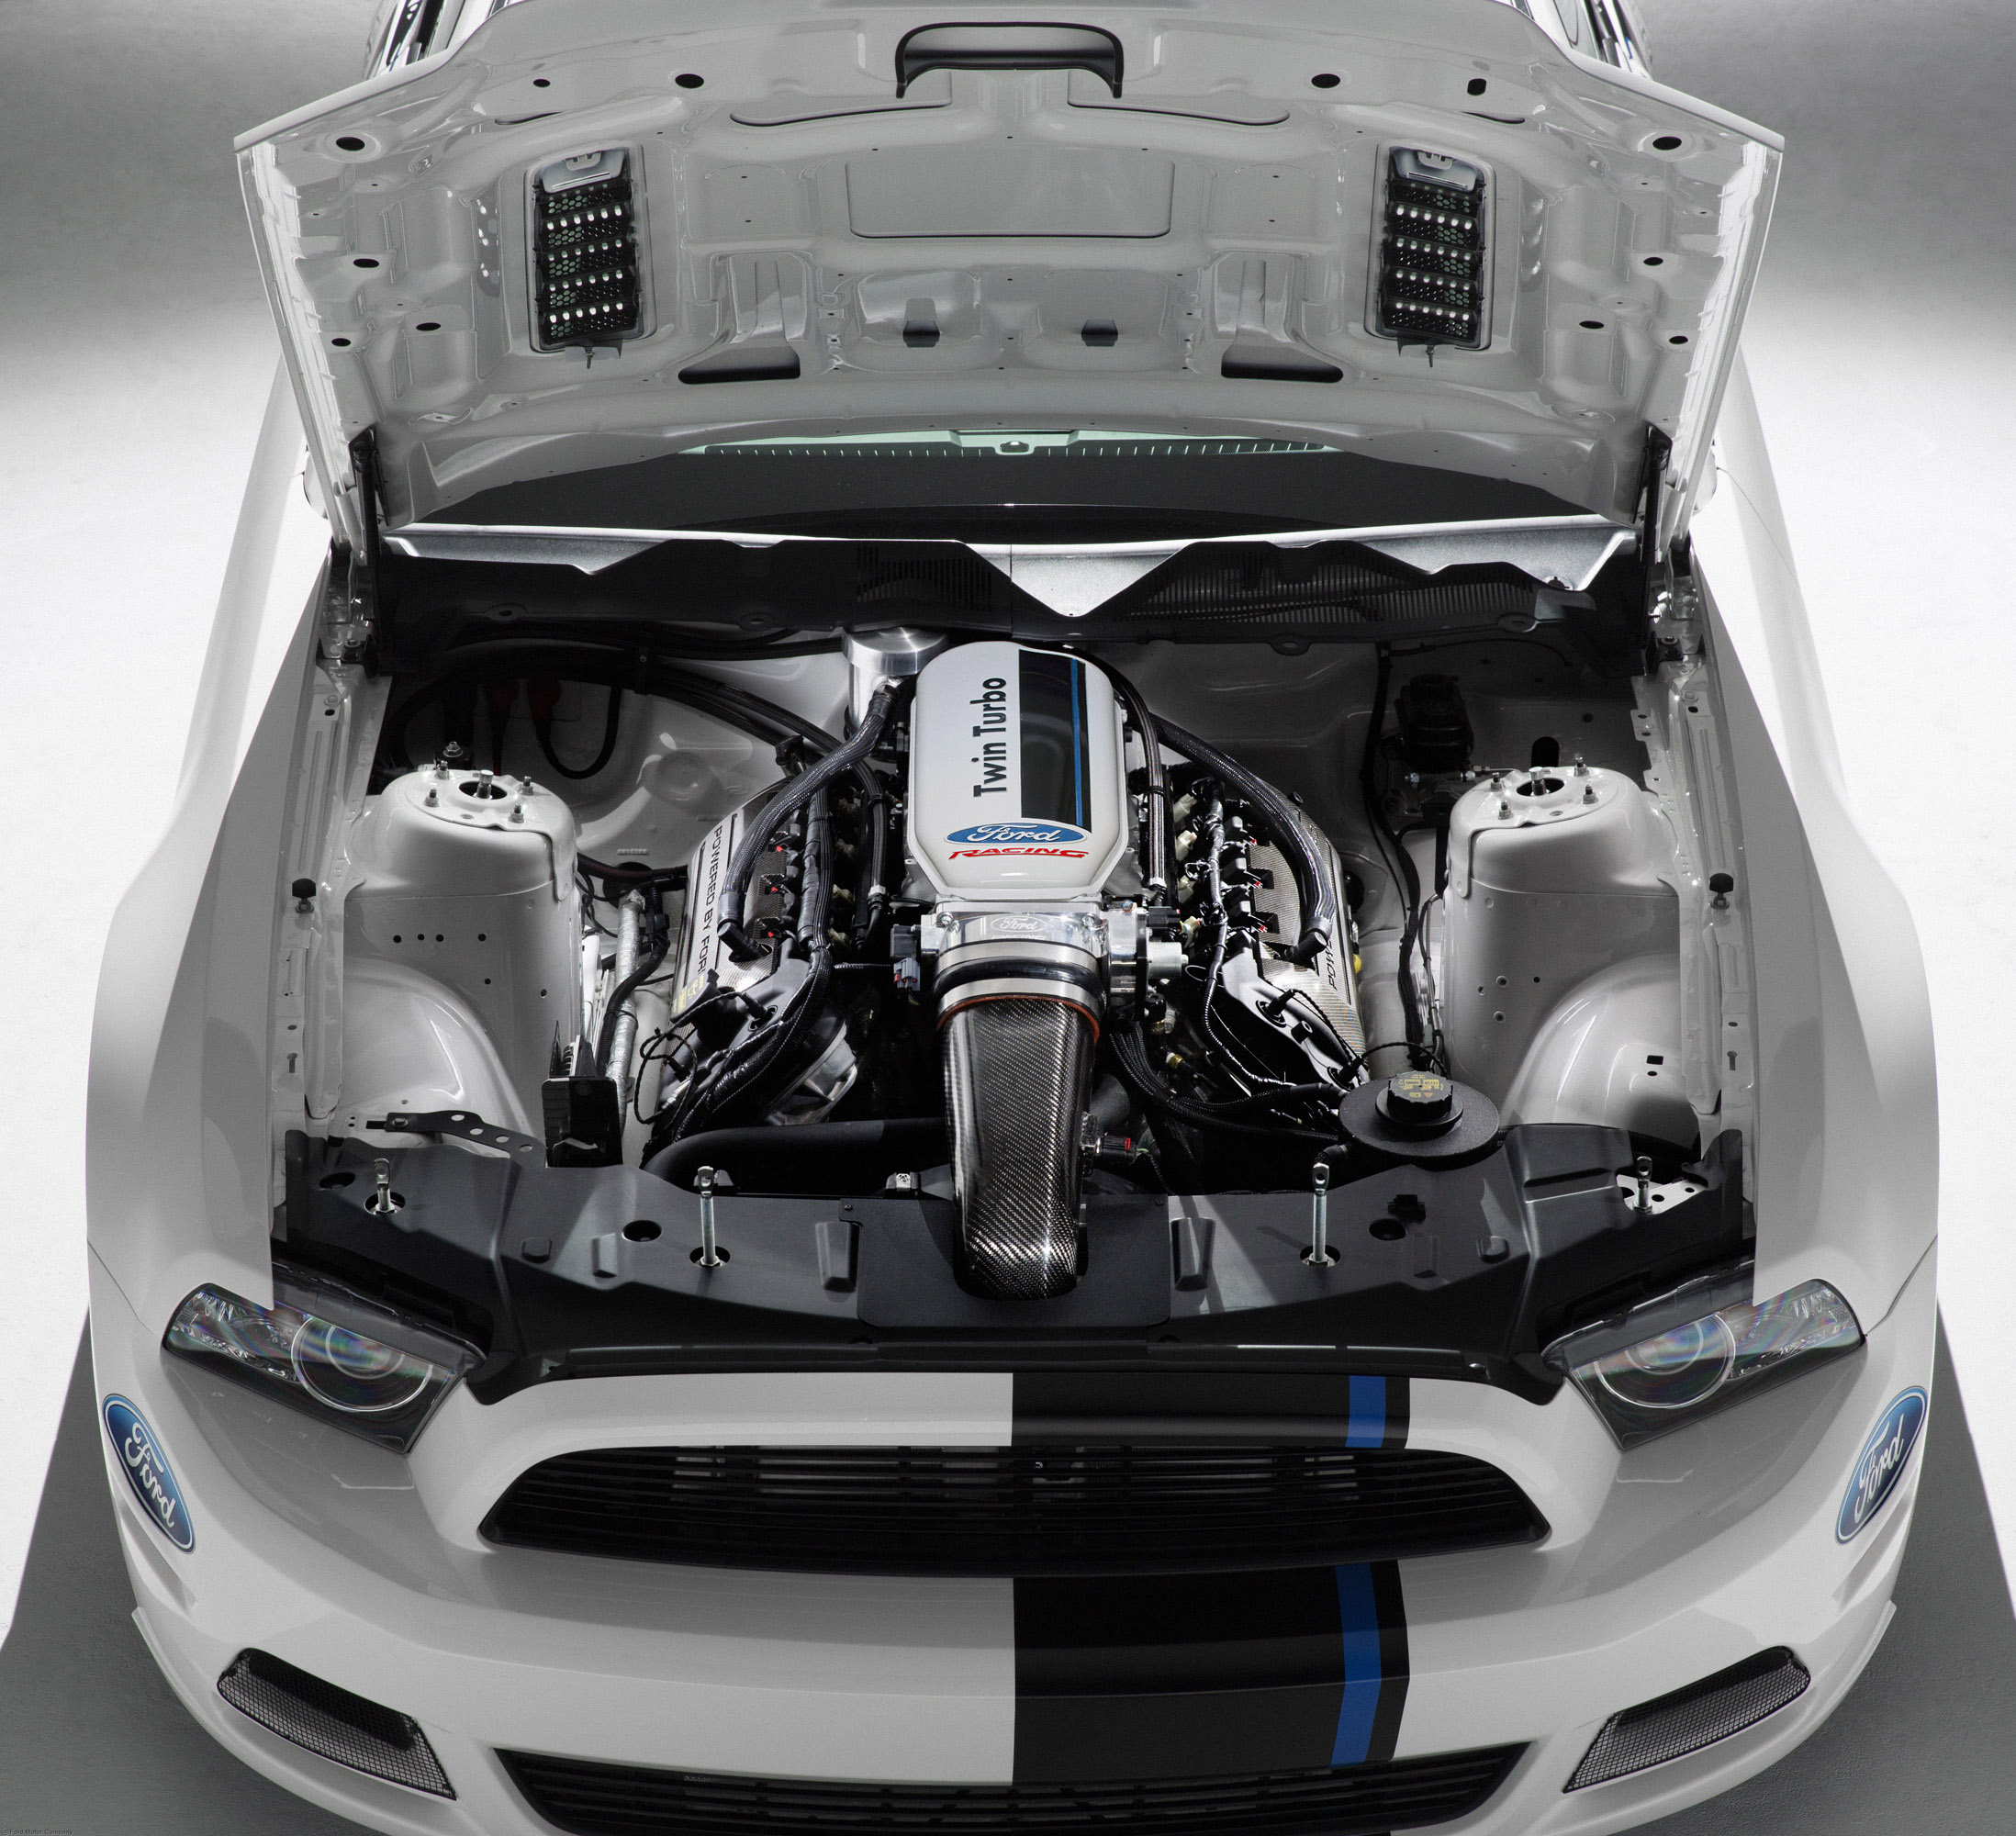 2013, Ford, Mustang, Cobra, Jet, Twin turbo, Concept, Race, Racing, Hot, Rod, Rods, Muscle, Engine, Engines Wallpaper